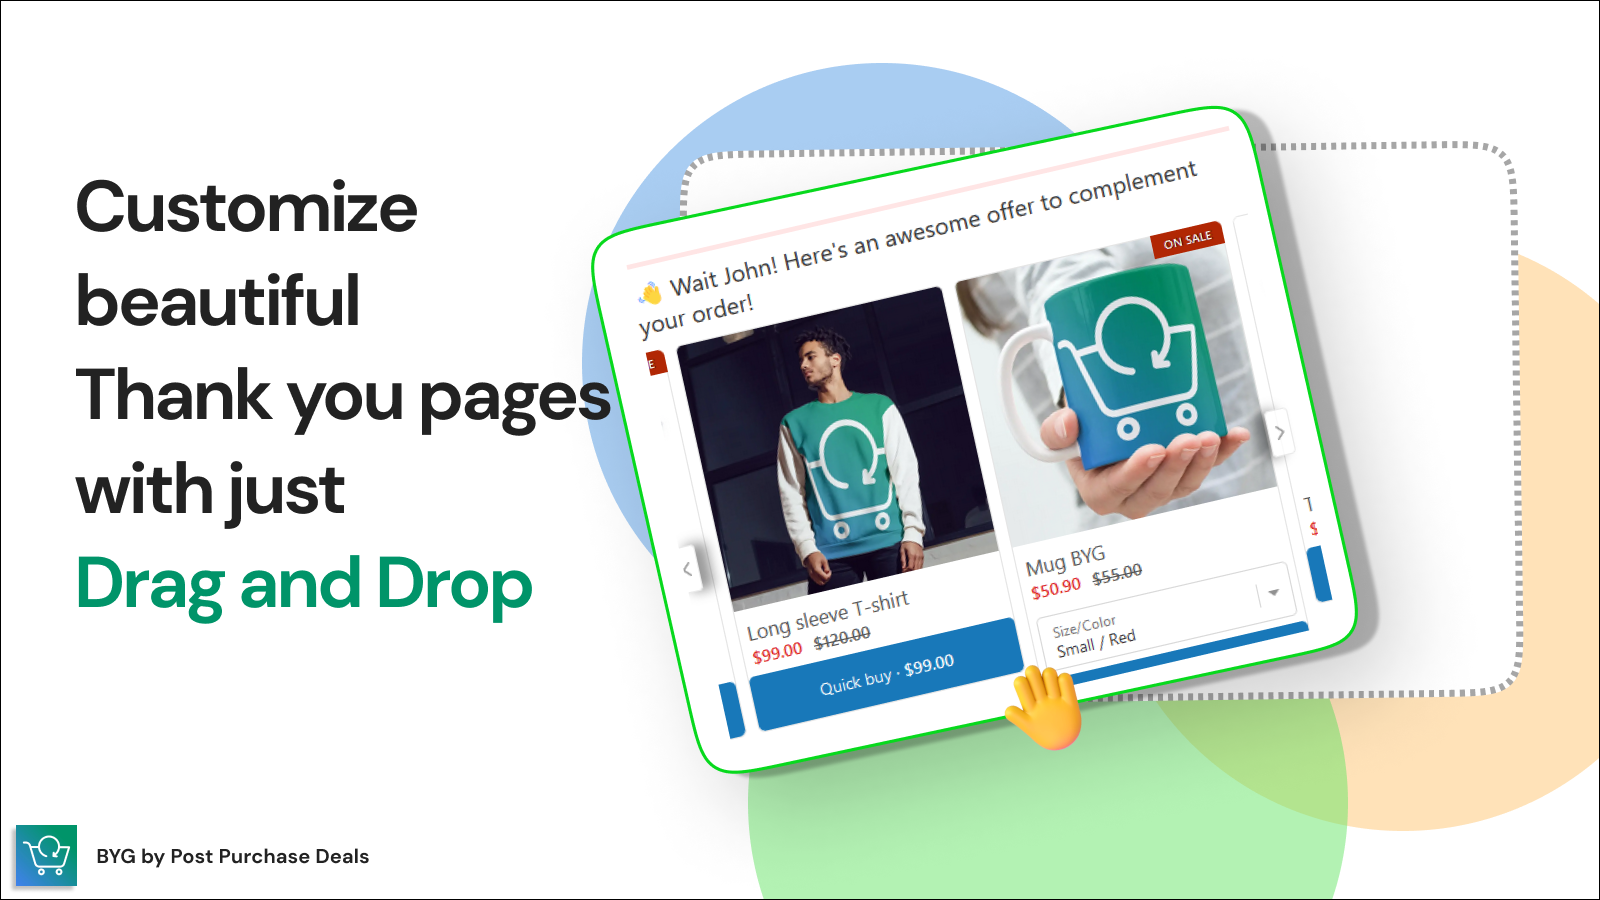 Customize beautiful  Thank you pages  with just  Drag and Drop